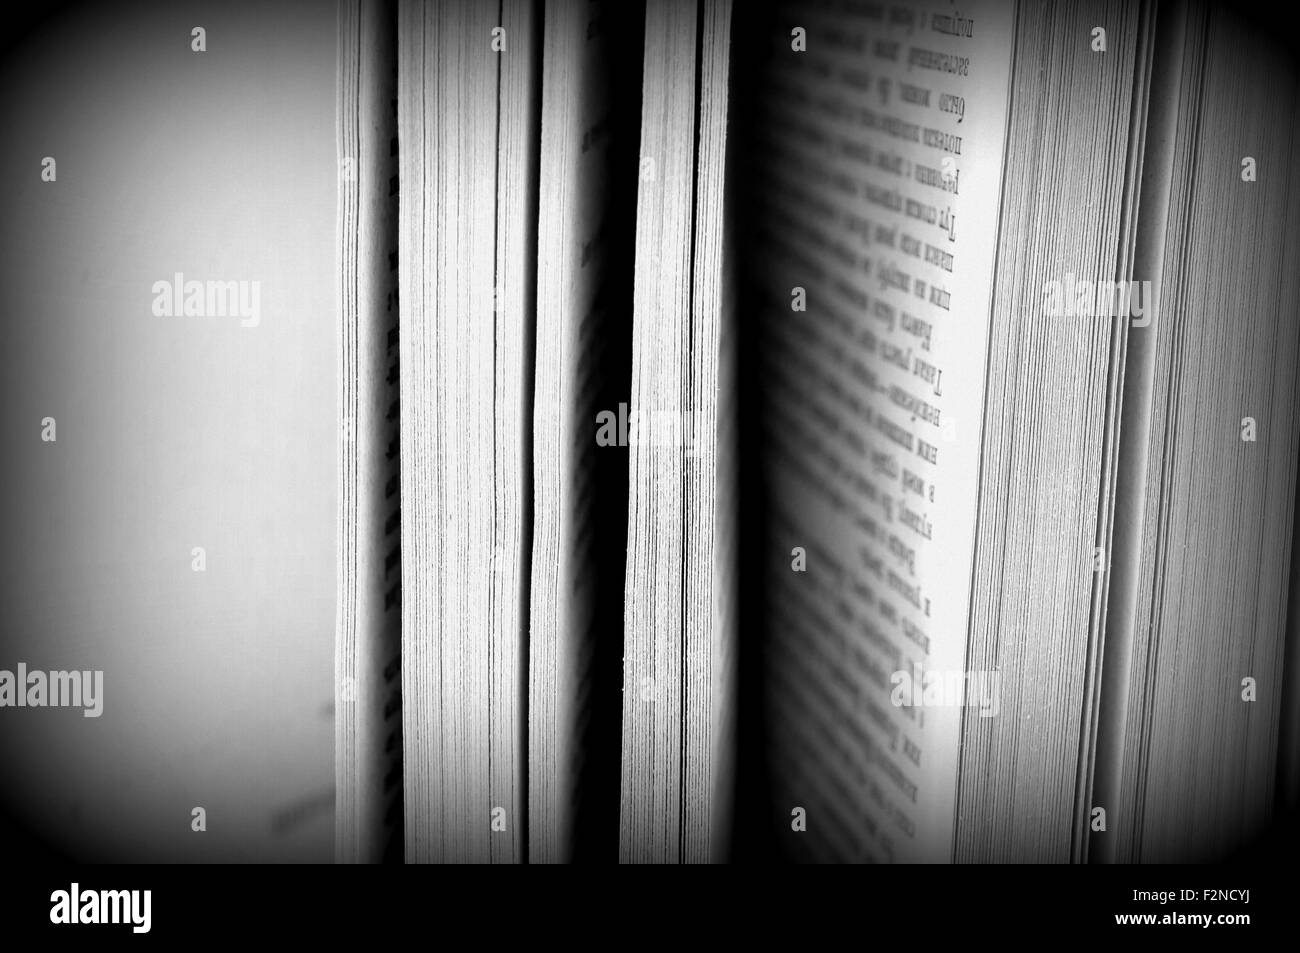 Close up of stack of old books Stock Photo